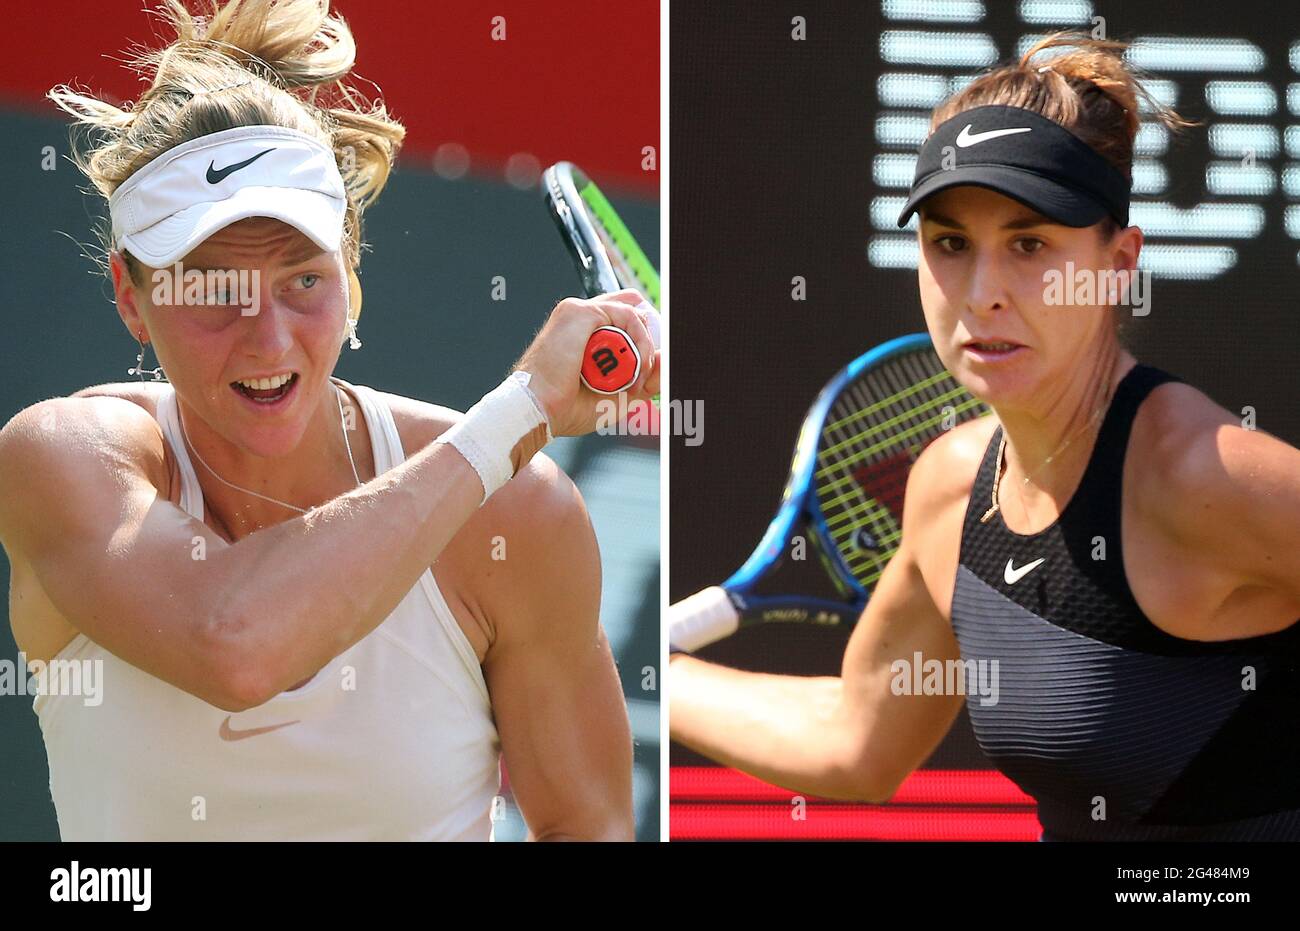 Berlin, Germany. 19th June, 2021. KOMBO - Tennis: WTA Tour, Singles.  Liudmila Samsonova (l) from Russia and Belinda Bencic from Switzerland  compete in the final of the bett1 open on 20.06.2021 on